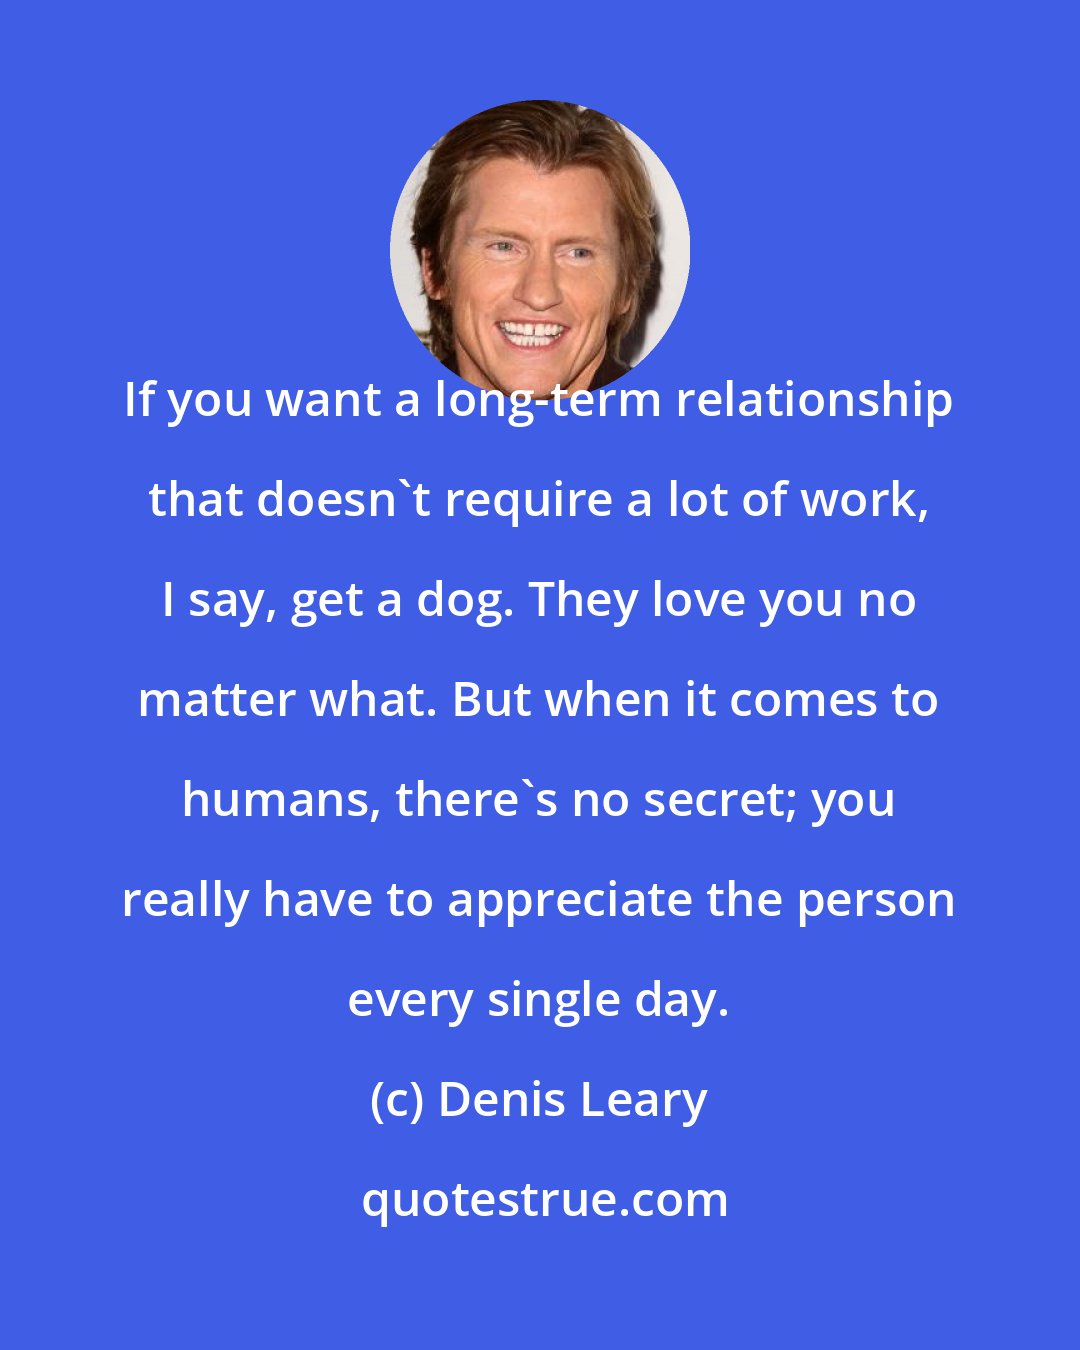 Denis Leary: If you want a long-term relationship that doesn't require a lot of work, I say, get a dog. They love you no matter what. But when it comes to humans, there's no secret; you really have to appreciate the person every single day.